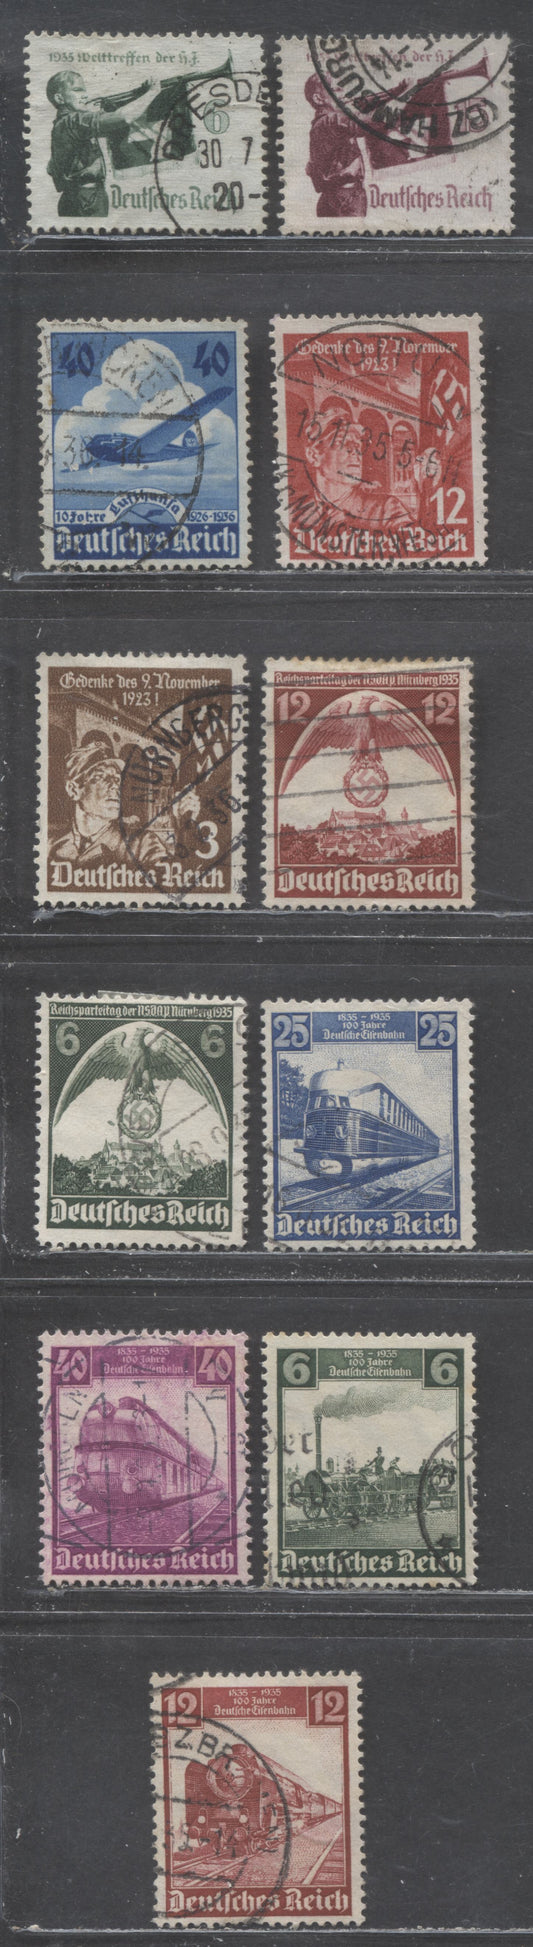 Lot 67 Germany SC#459-469 1935 Railroad Centenary - 10th Anniversary Of Lufthansa Air Service Issues, 11 Fine/Very Fine Used Singles, Click on Listing to See ALL Pictures, Estimated Value $12